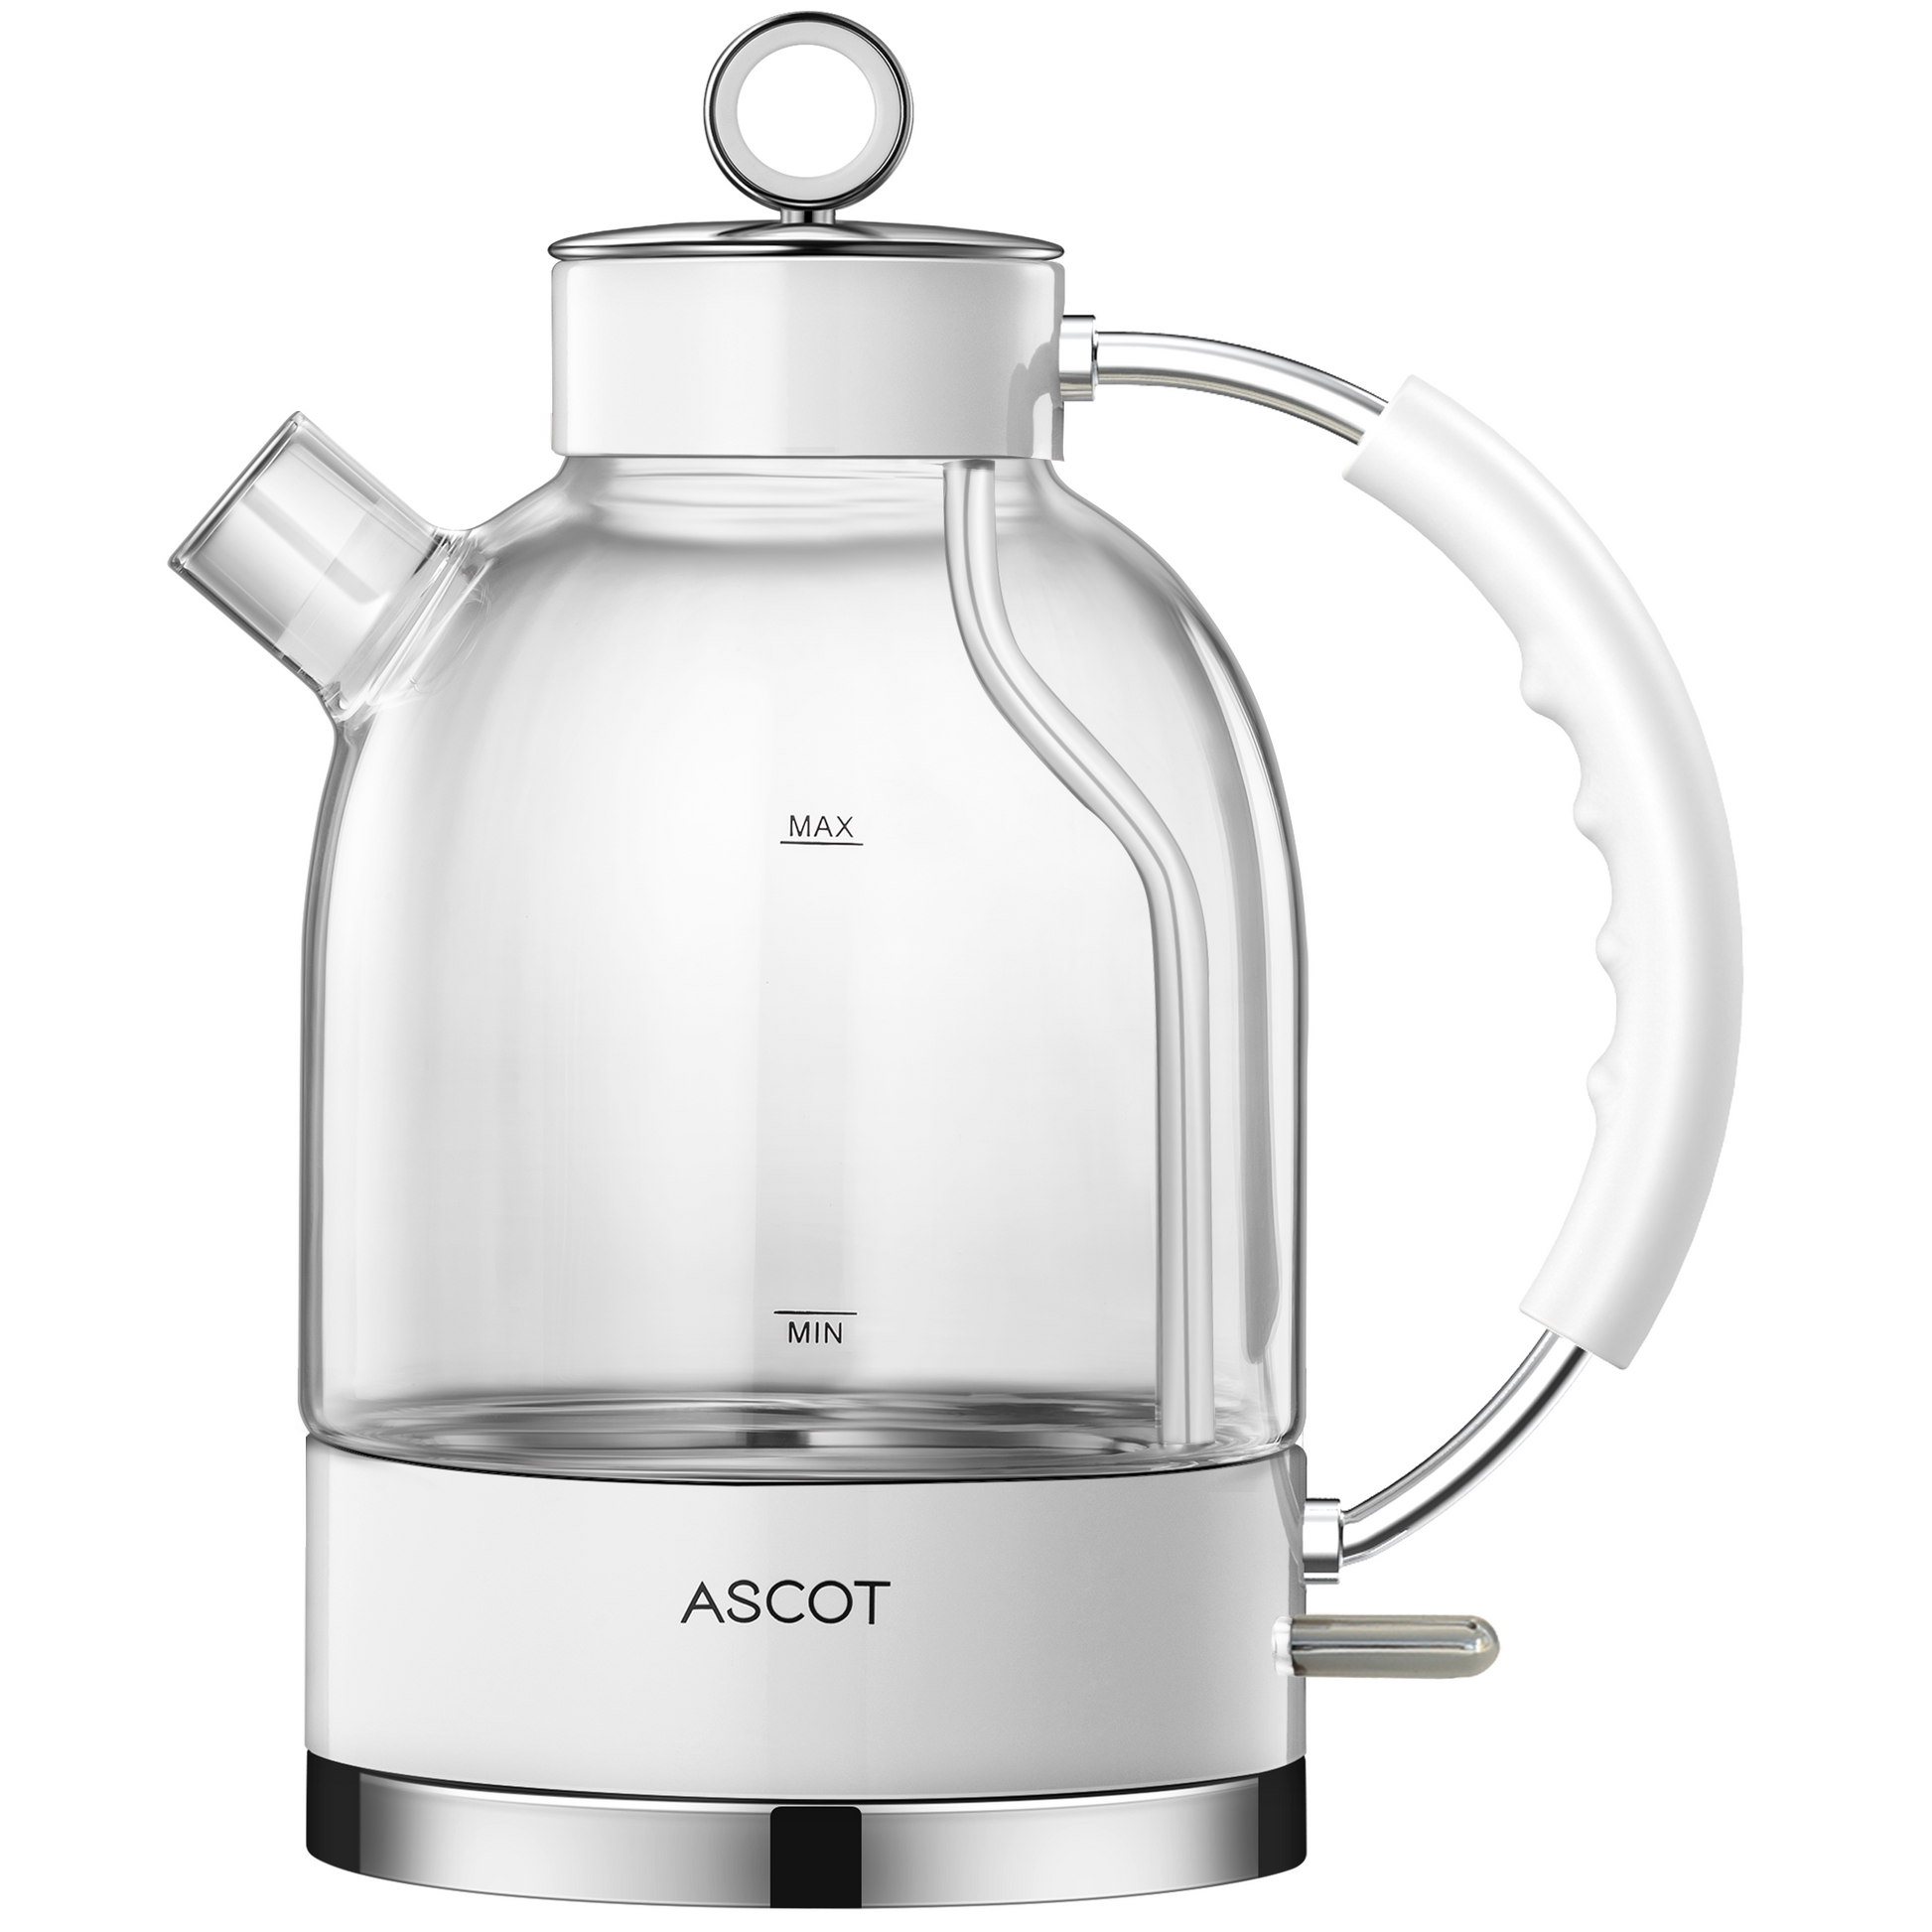 Explore Hot Water Kettles Made so You Can Brew Confidently